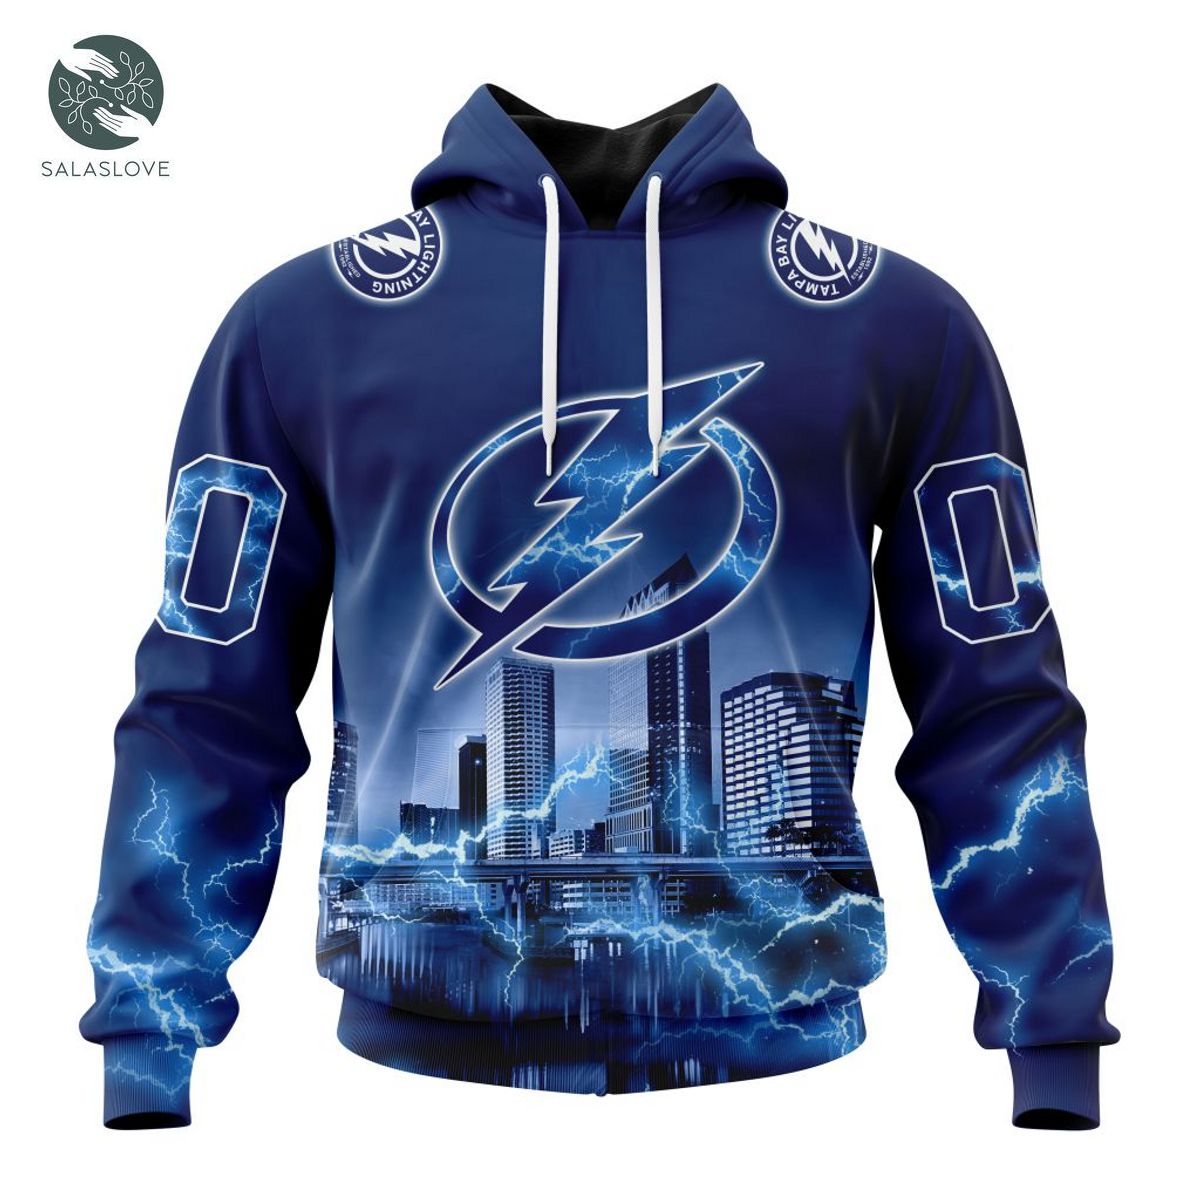 NHL Tampa Bay Lightning With Thunderstorms Hoodie